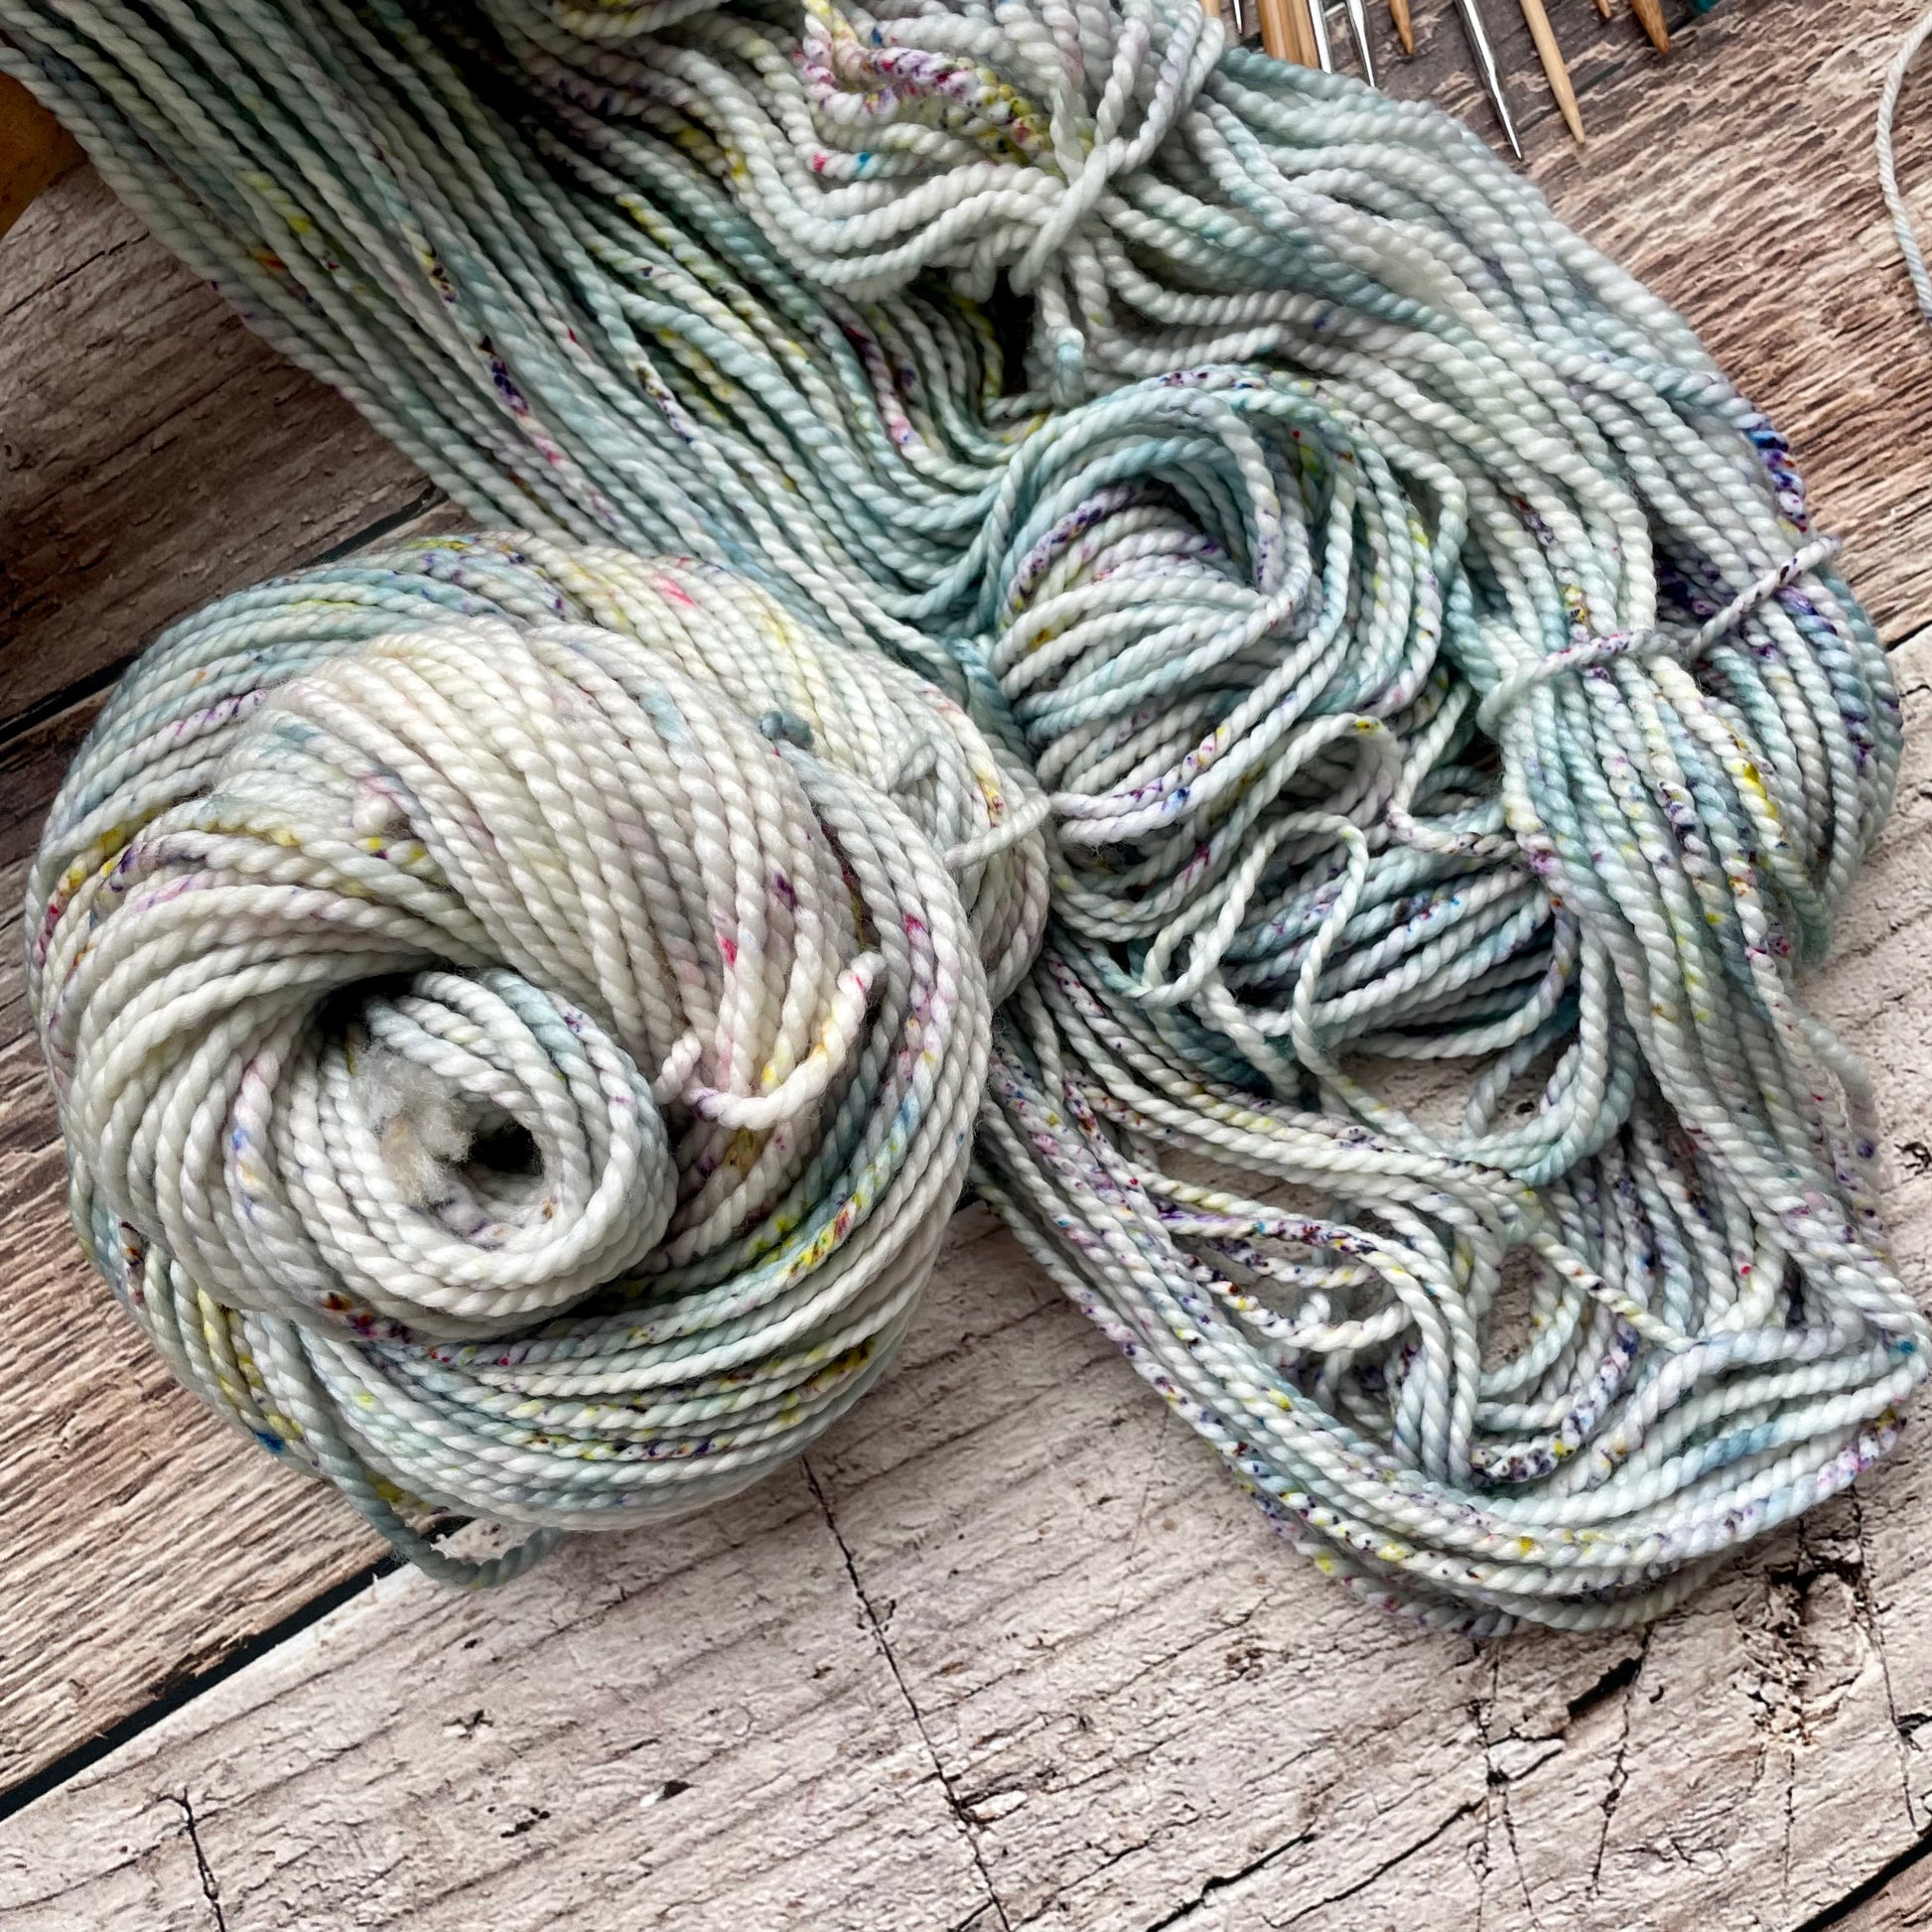 ontheround: uniquely hand dyed yarn & fiber